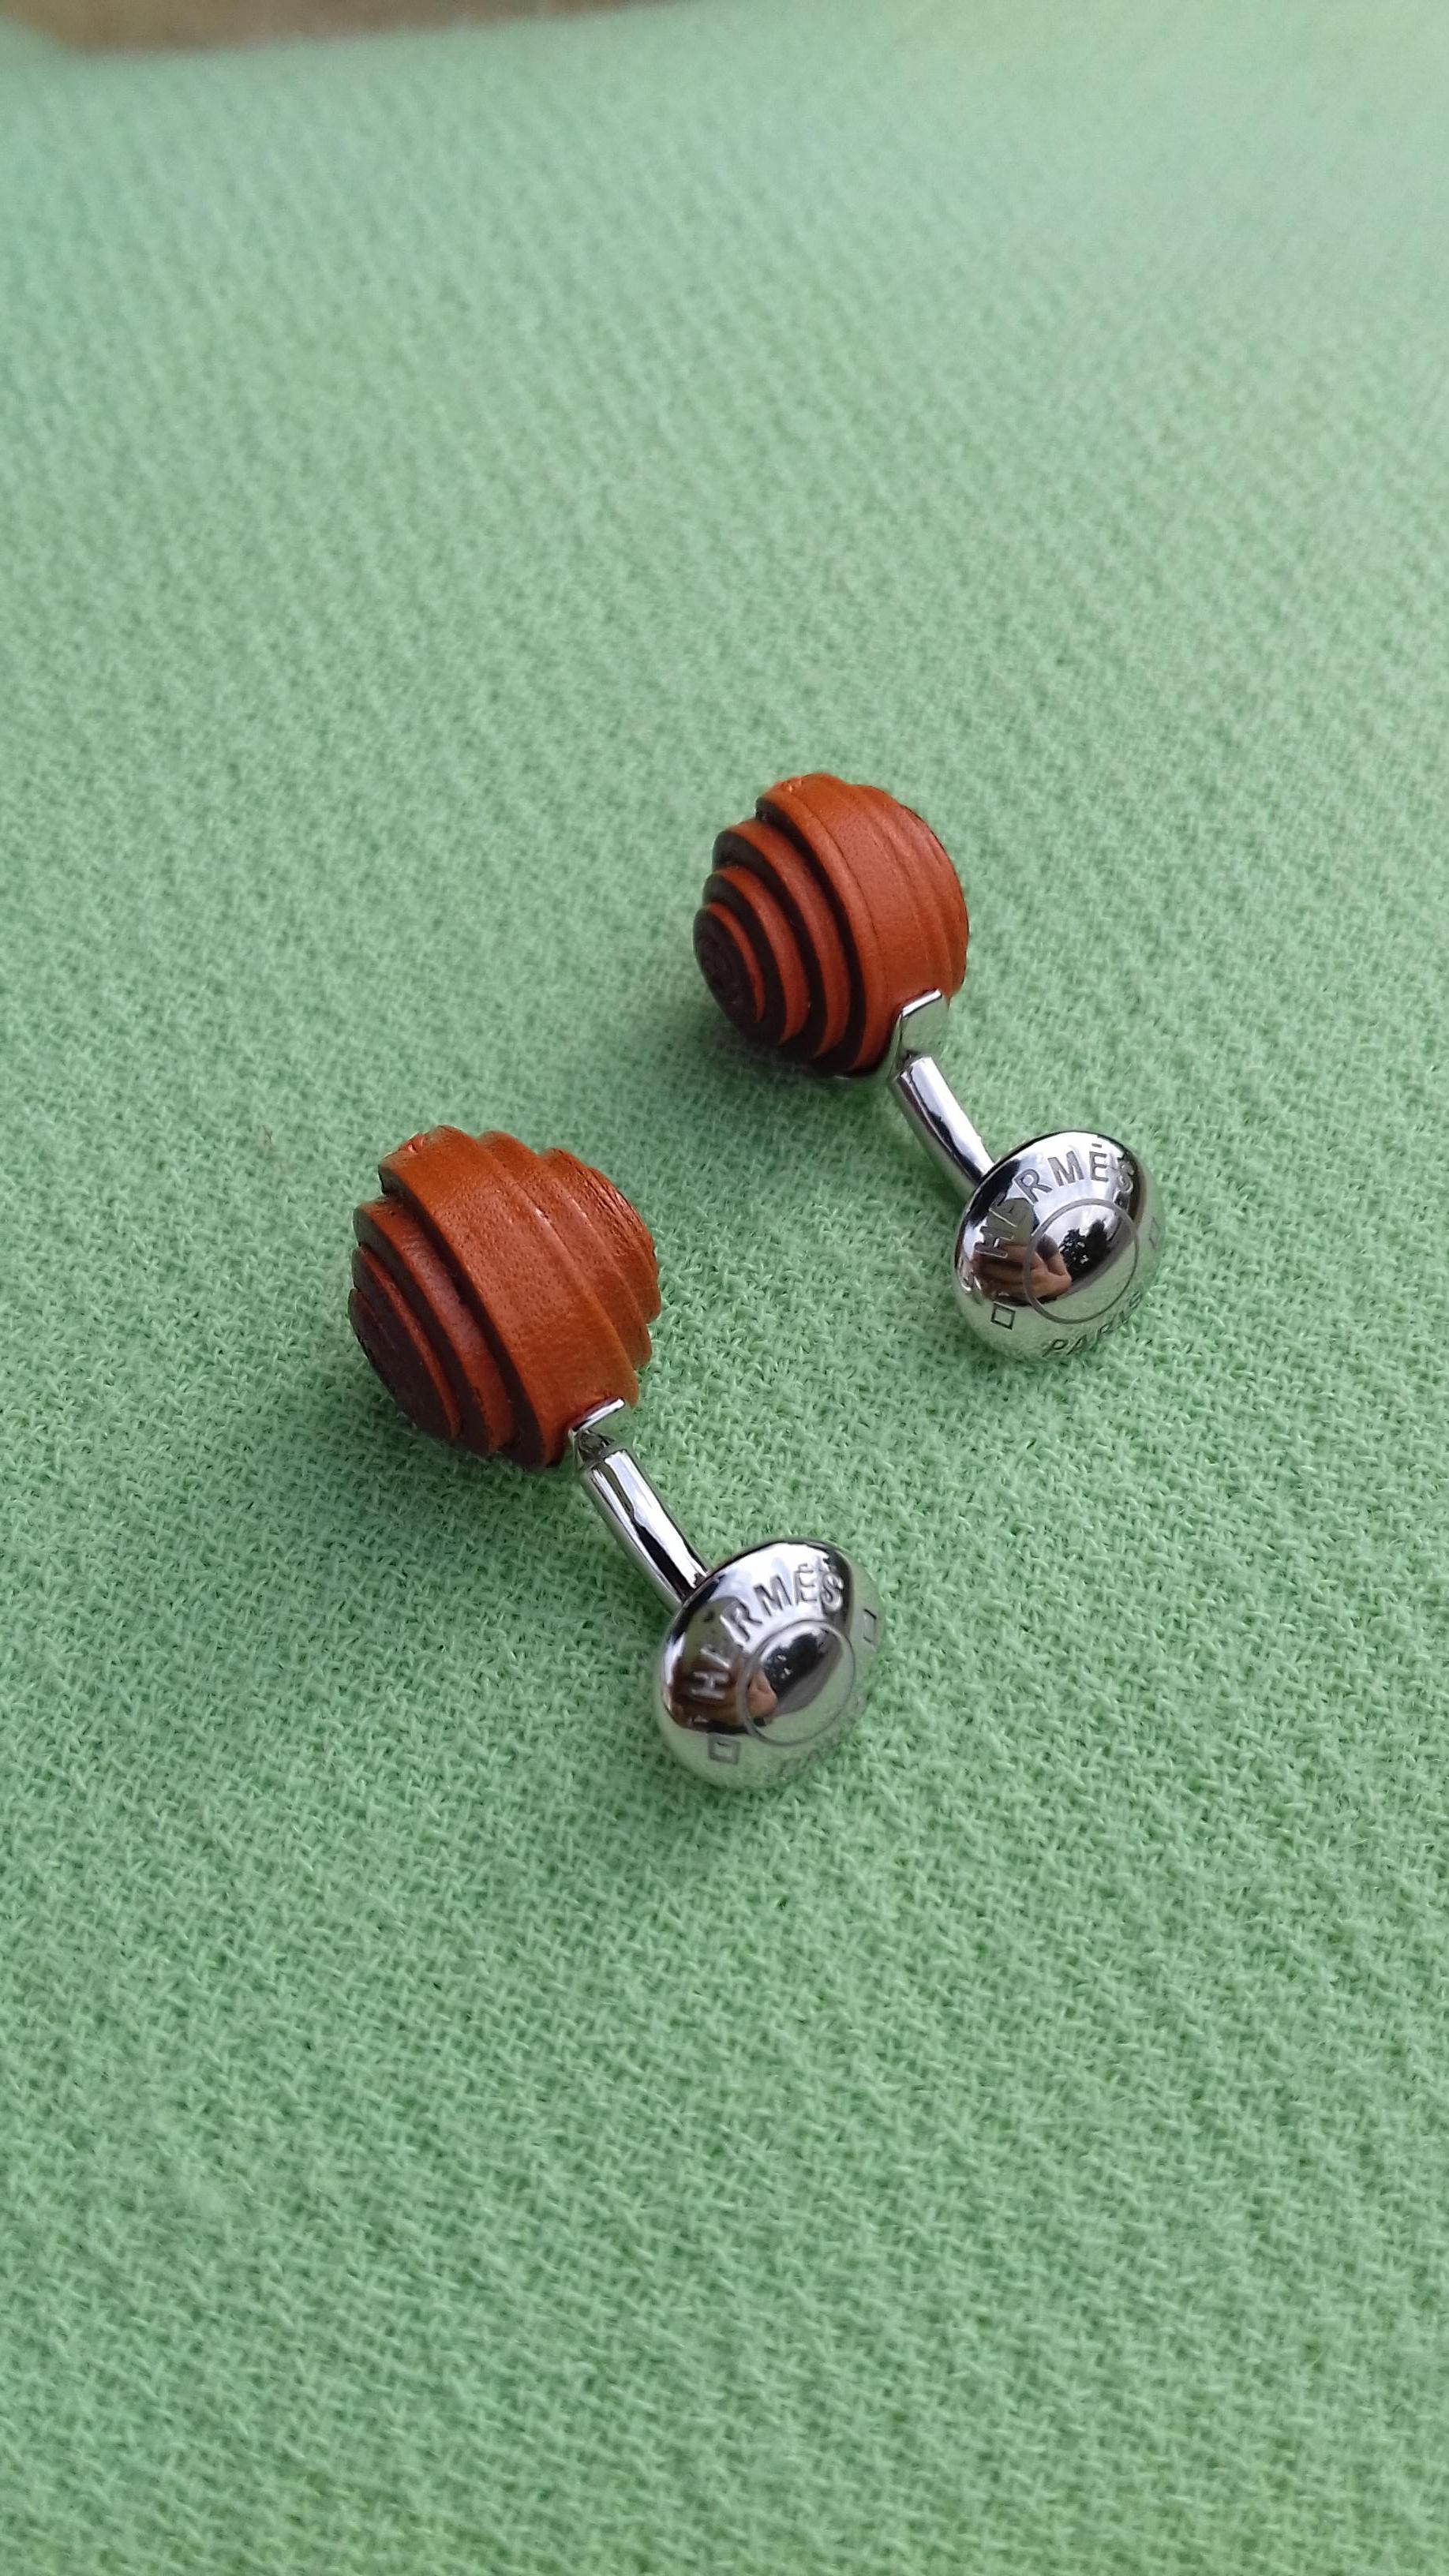 Hermès Coiled Leather and Sterling Silver Cuffs Button Snail Shaped Cufflinks  11